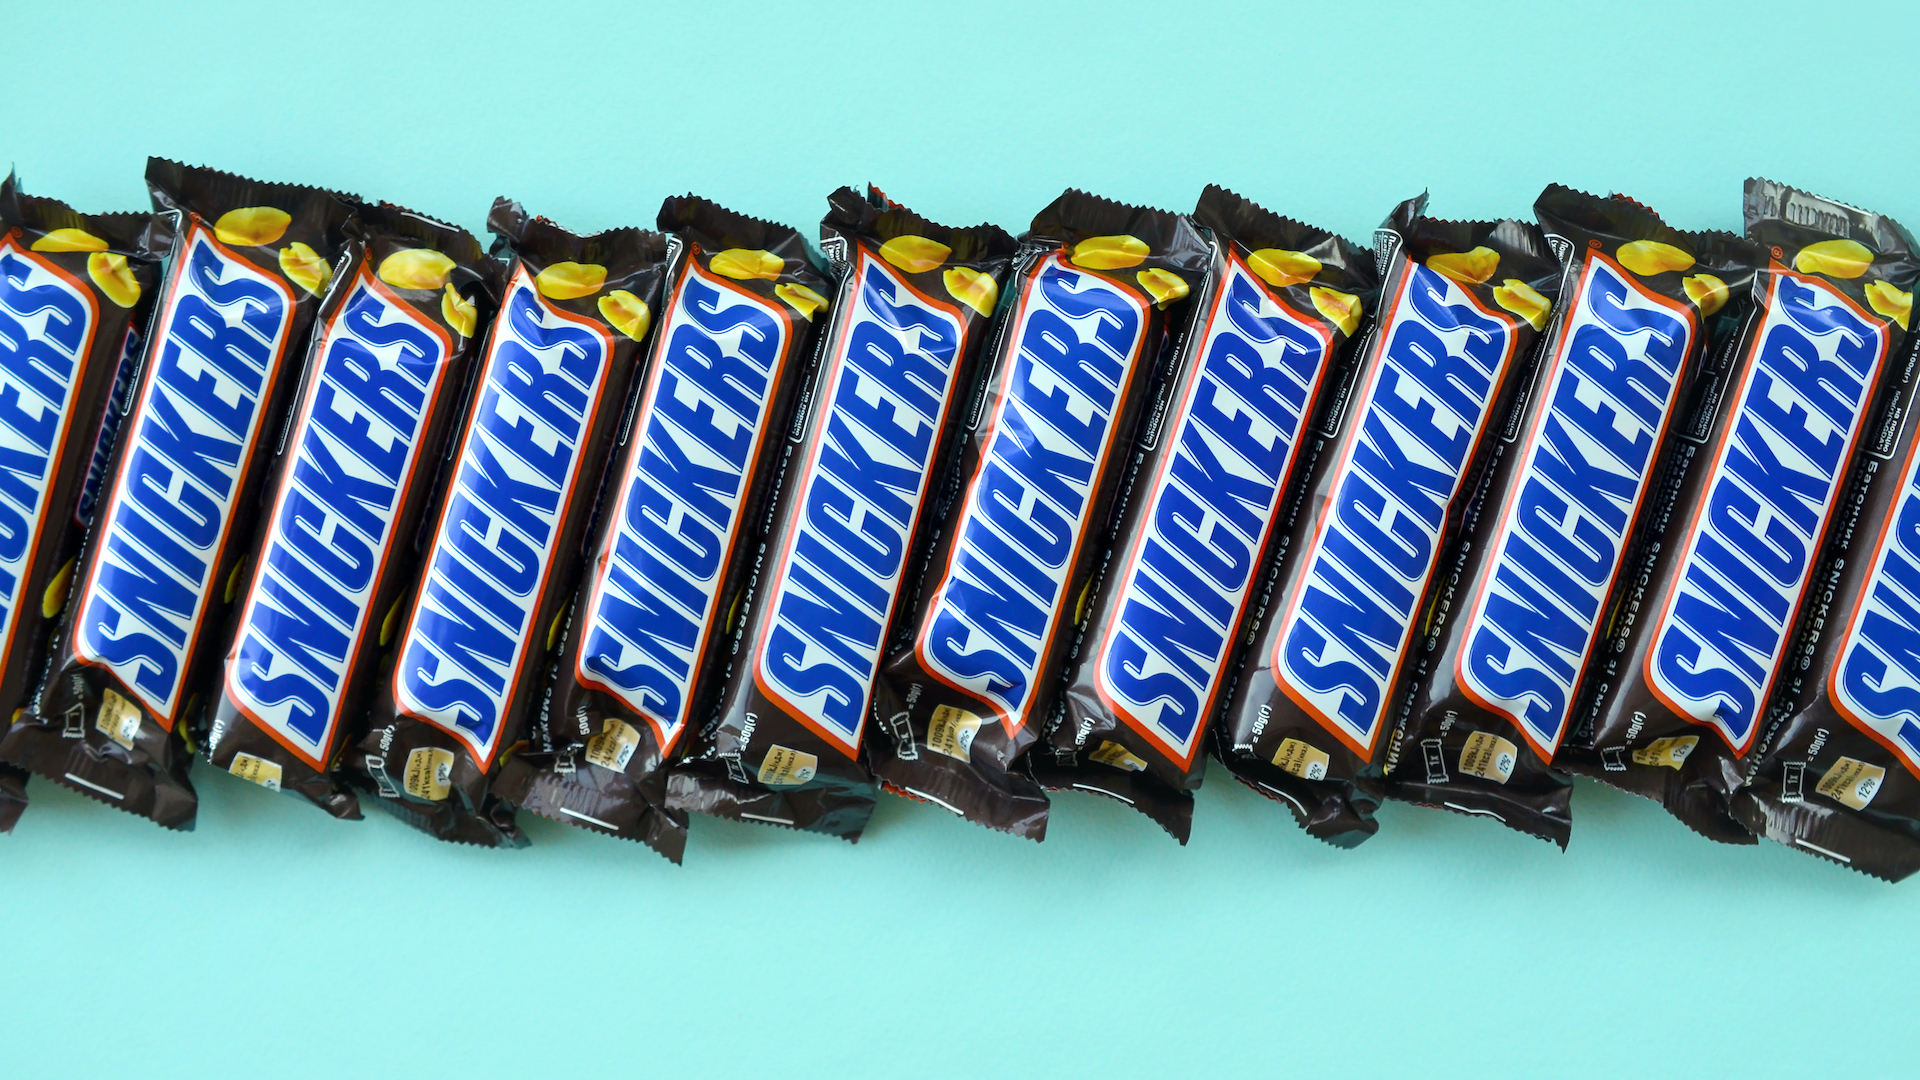 A row of Snickers bars